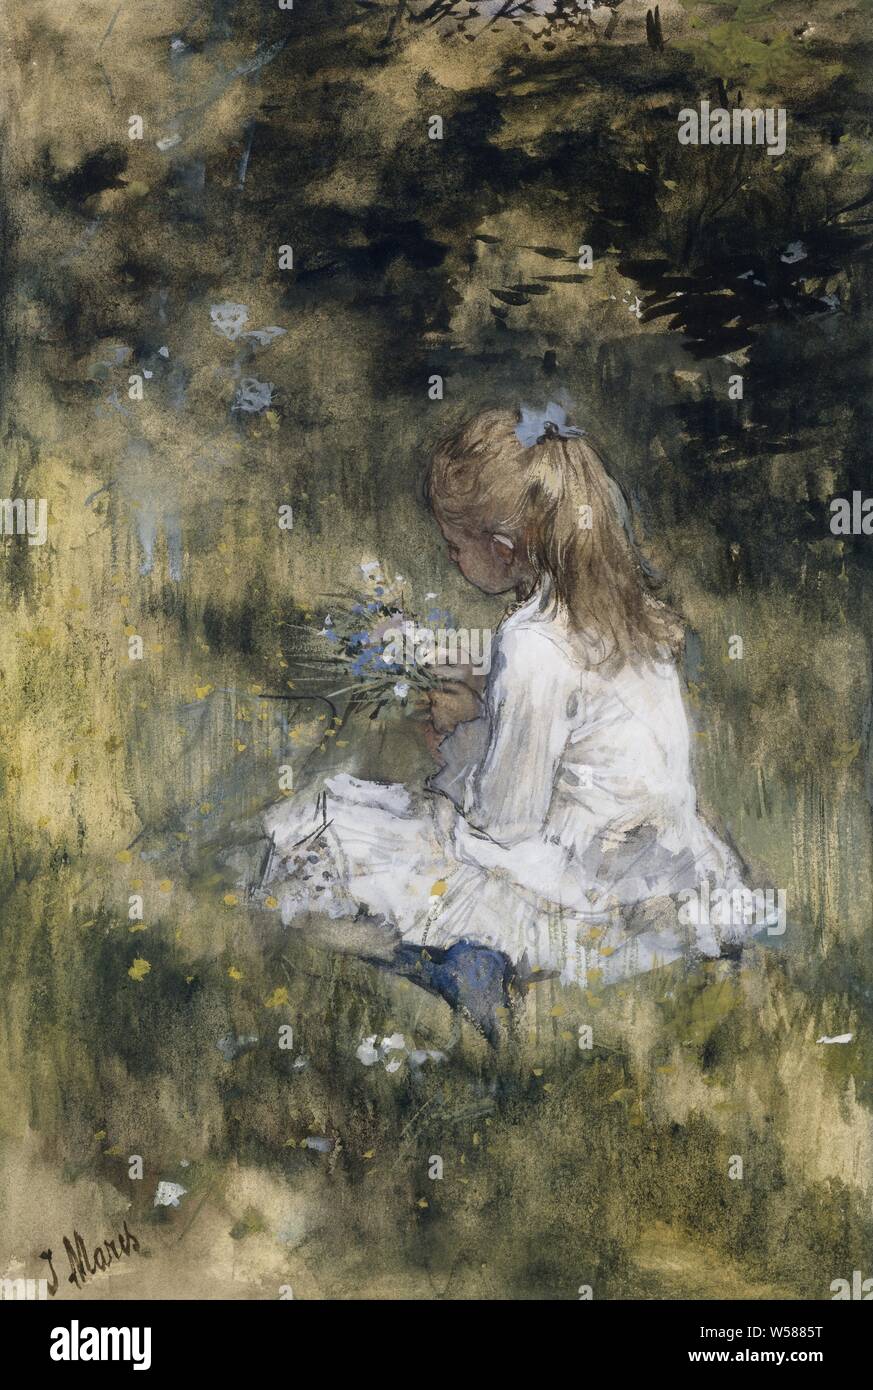 A Girl with Flowers on the Grass Jacob Maris' daughter with flowers in the grass, A girl, an artist's daughter with flowers in the grass., Girl (child between toddler and youth), flowers, child and nature (games and plays), Jacob Maris (mentioned on object), 1878, paper, chalk, watercolor (paint), brush, h 391 mm × w 261 mm Stock Photo